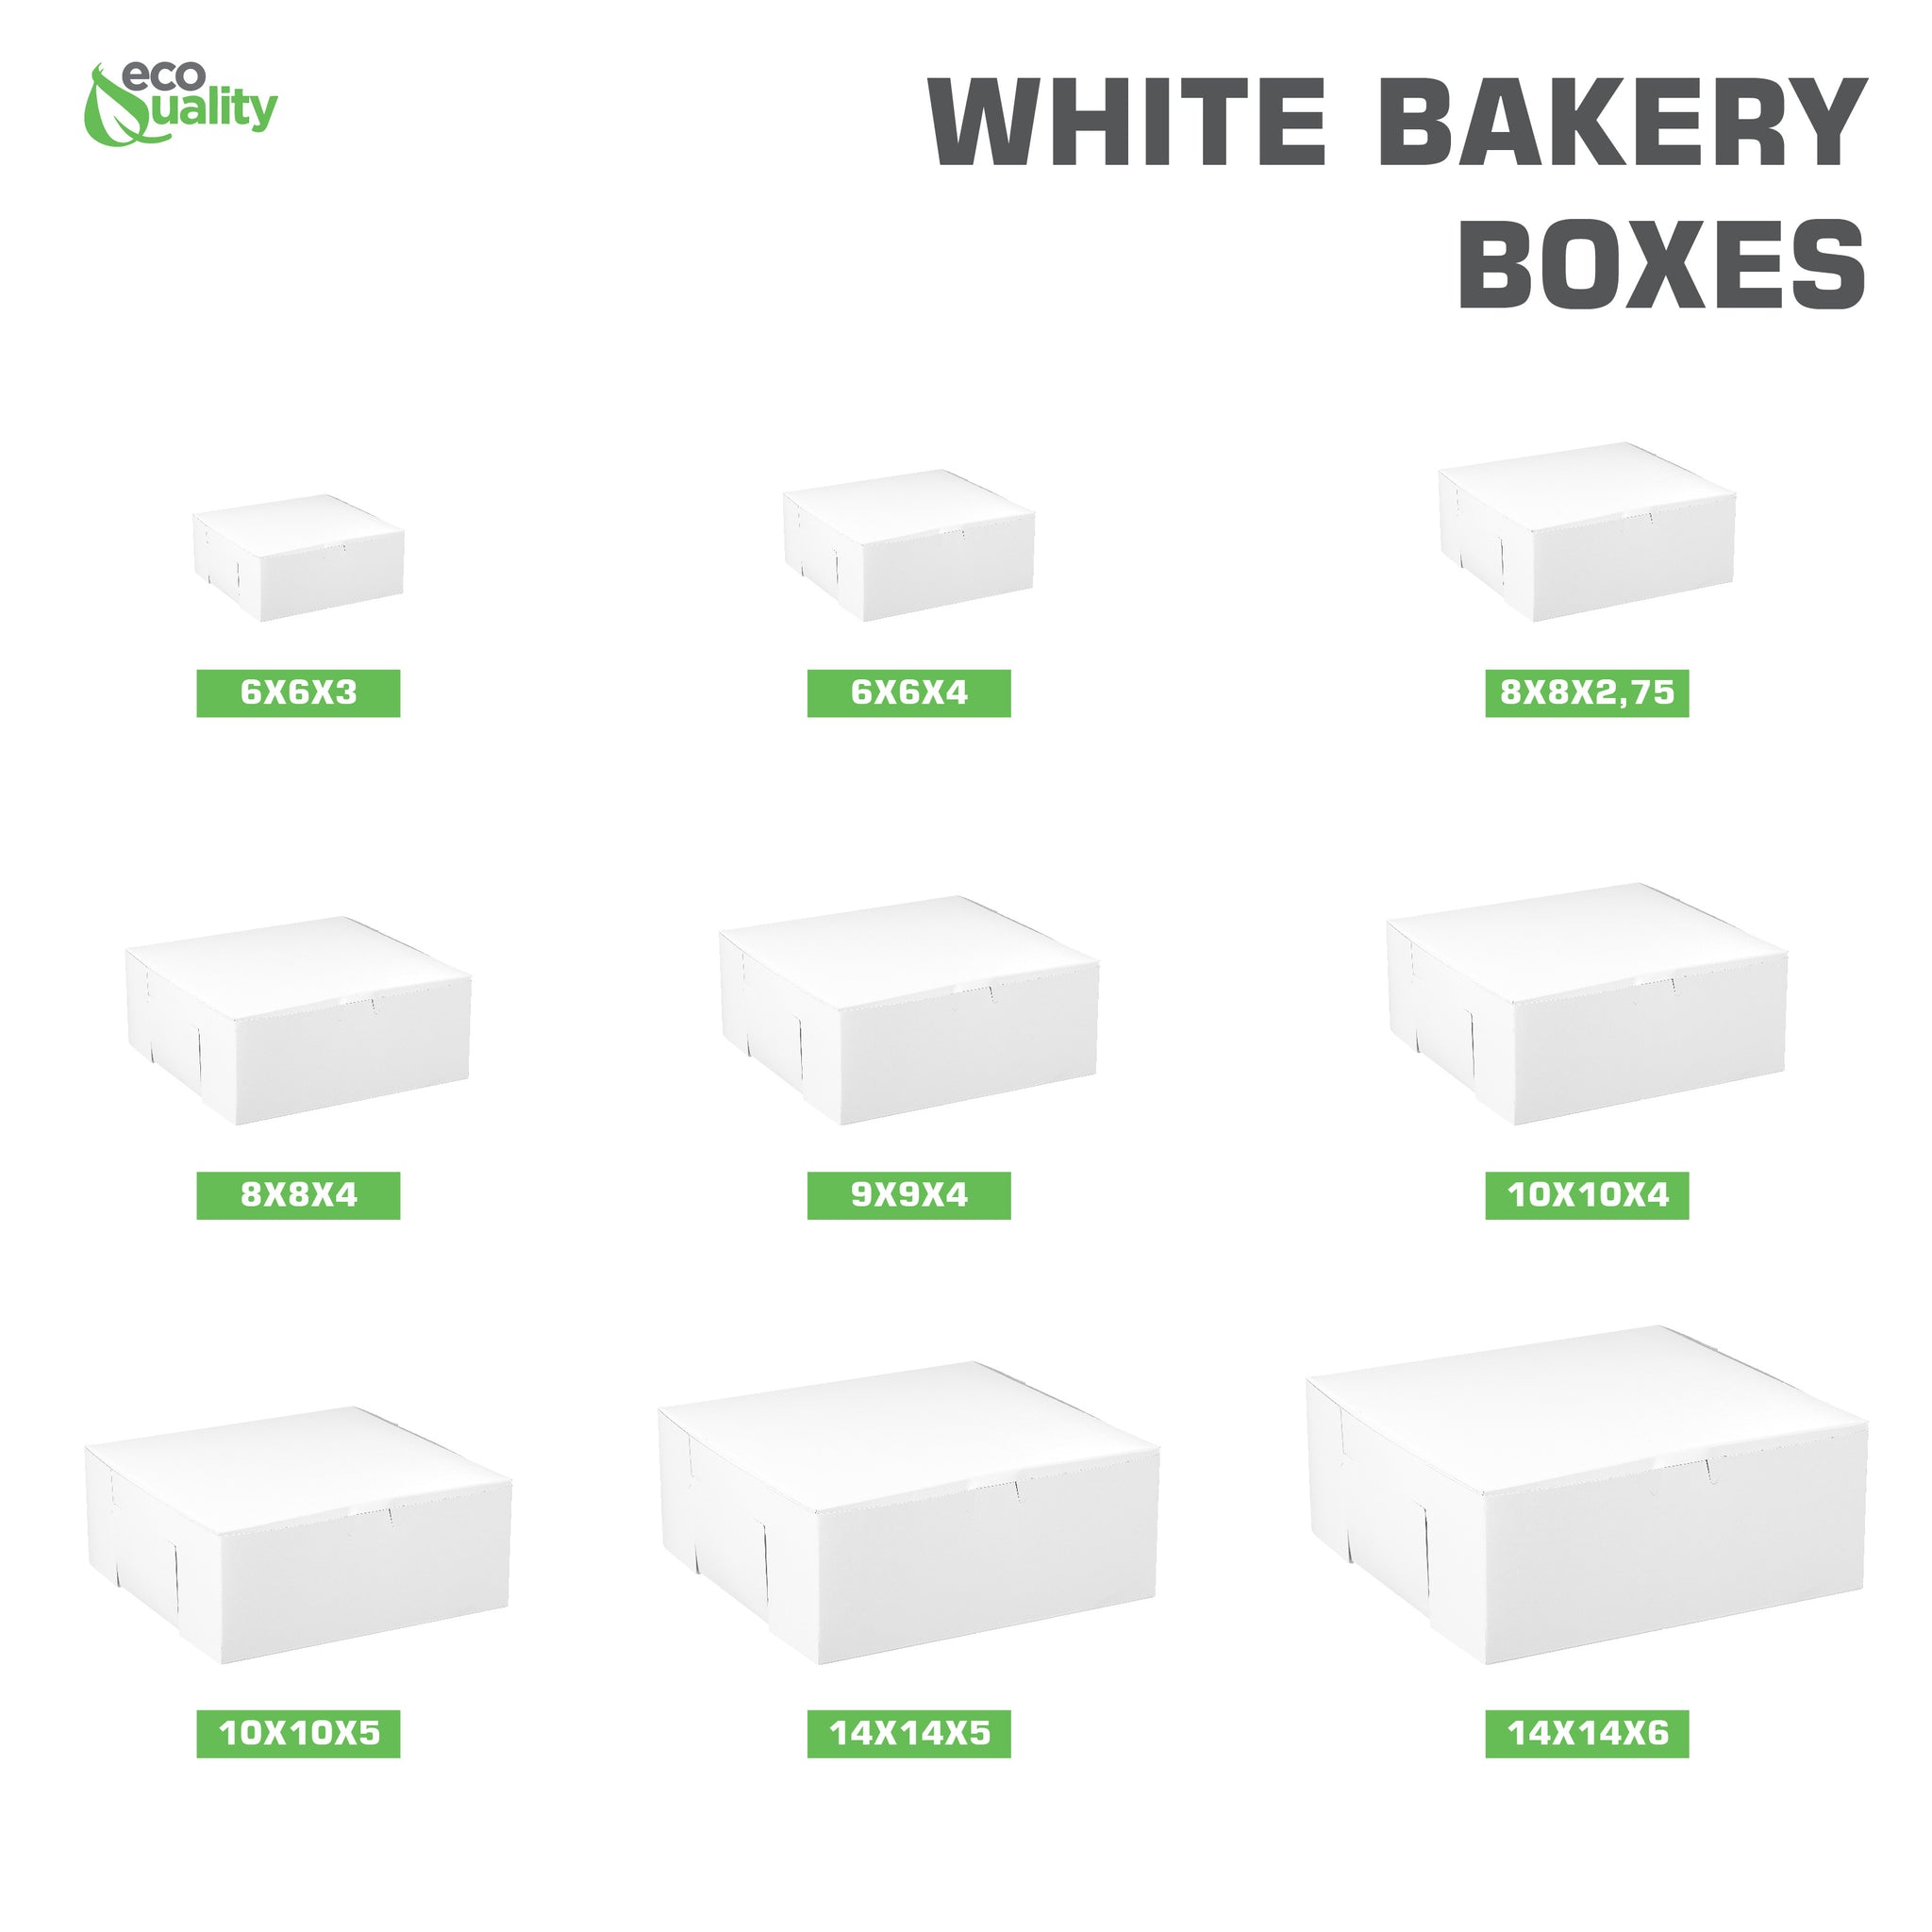 White Kraft Paperboard for Home or Retail  White Bakery Pastry Boxes  Restaurant Food Trucks Caterers take out sustainable  Recyclable for Pastries  Pies  Paper Cardboard  Gift Box  Ecofriendly  Cookies  Catering Restaurant Cafe Buffet Event Party  Cakes  Baby Shower  affordable bulk economical commercial wholesale